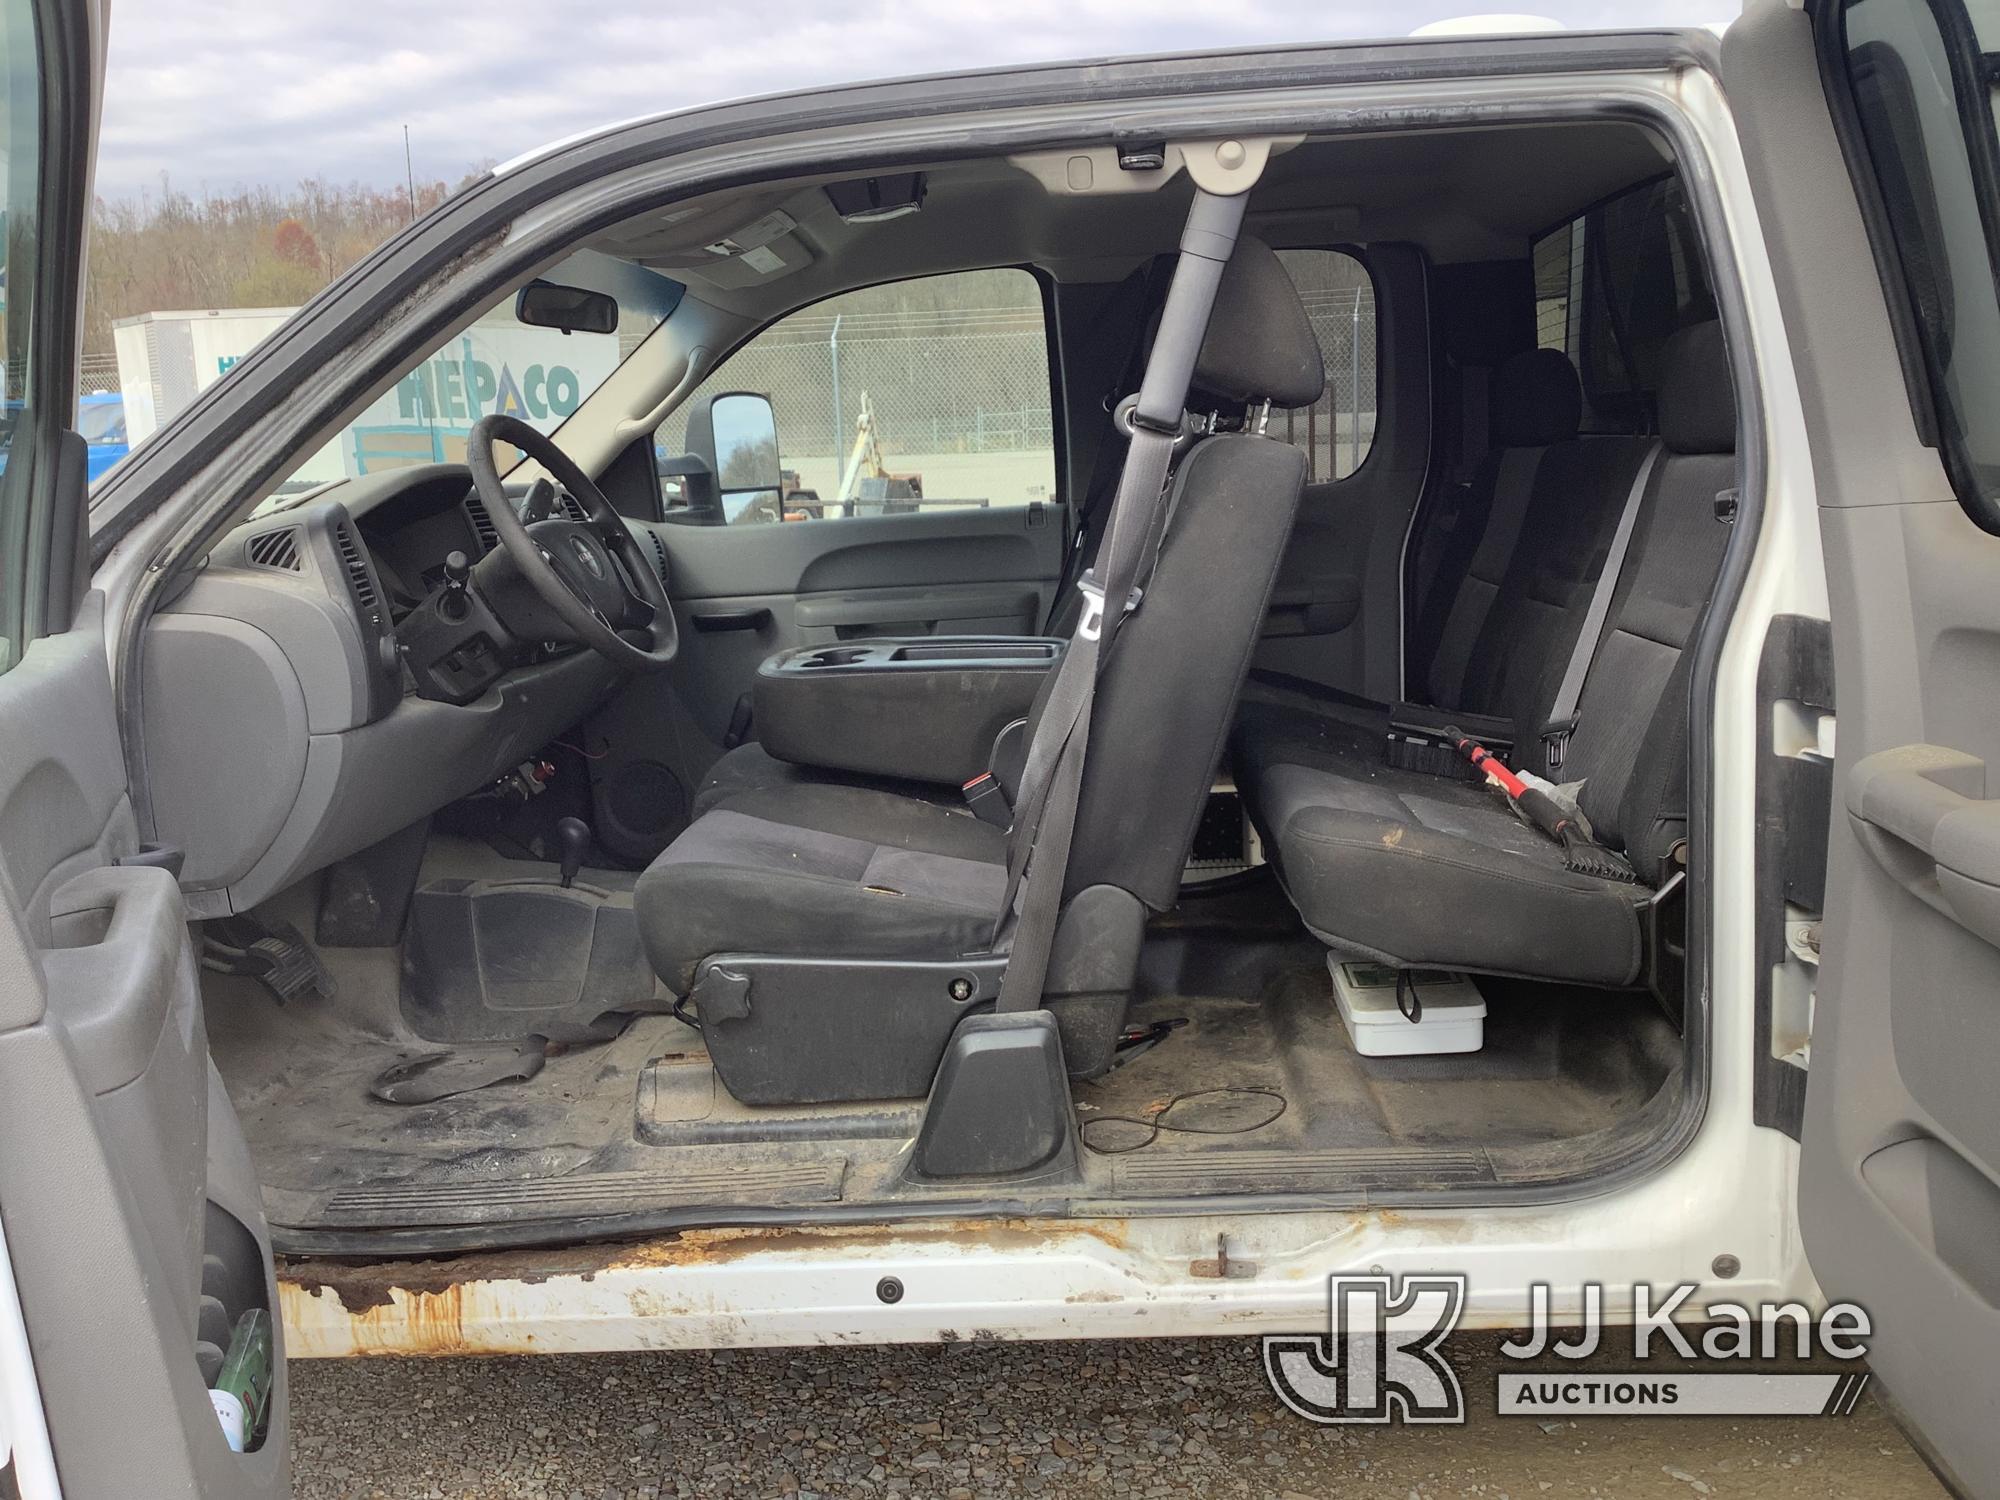 (Smock, PA) 2010 GMC Sierra 1500 4x4 Extended-Cab Pickup Truck Title Delay) (Runs & Moves, Rust & Bo